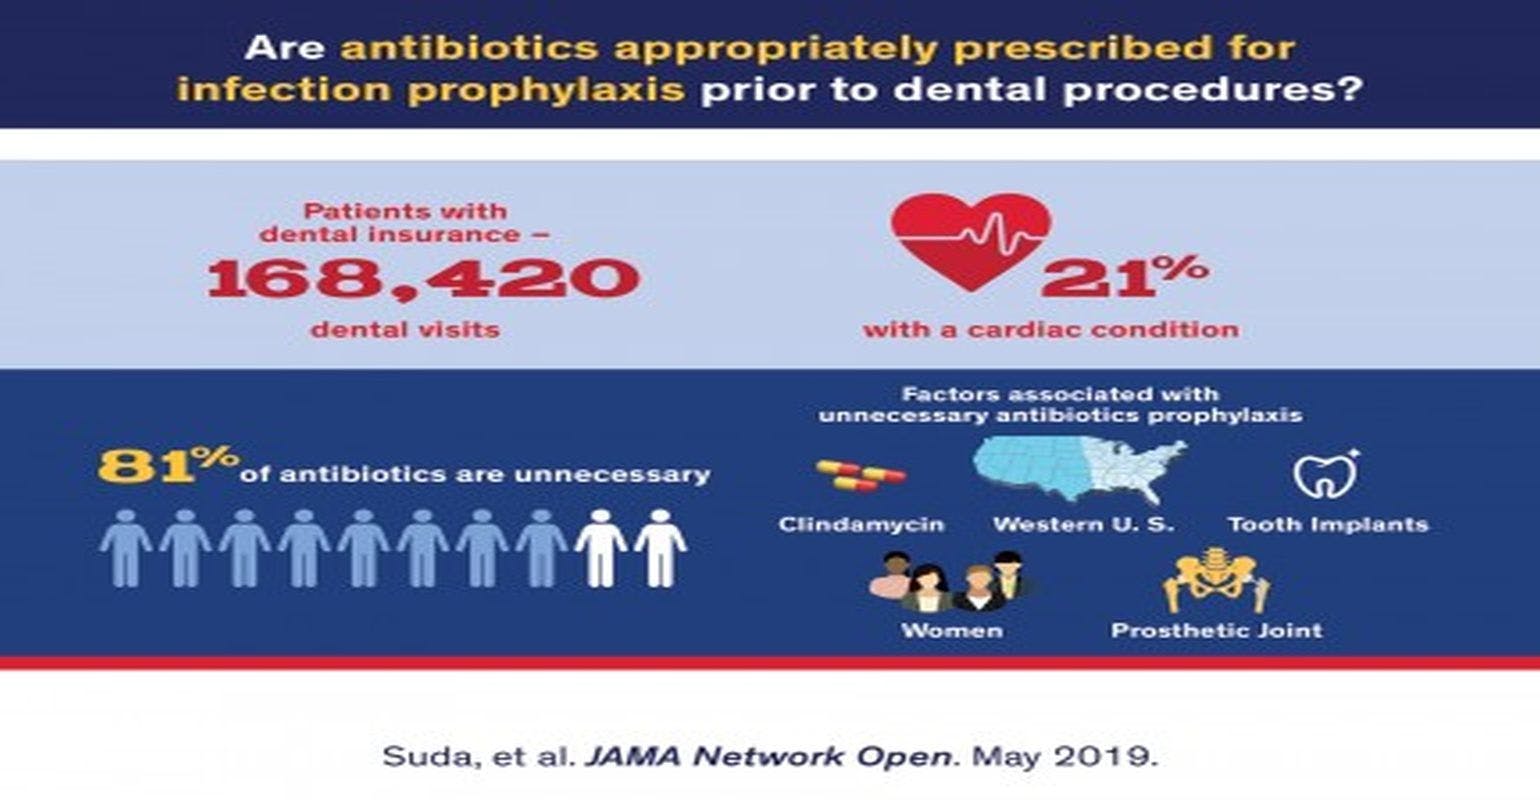 Most Preventive Antibiotics Prescribed by Dentists are Unnecessary